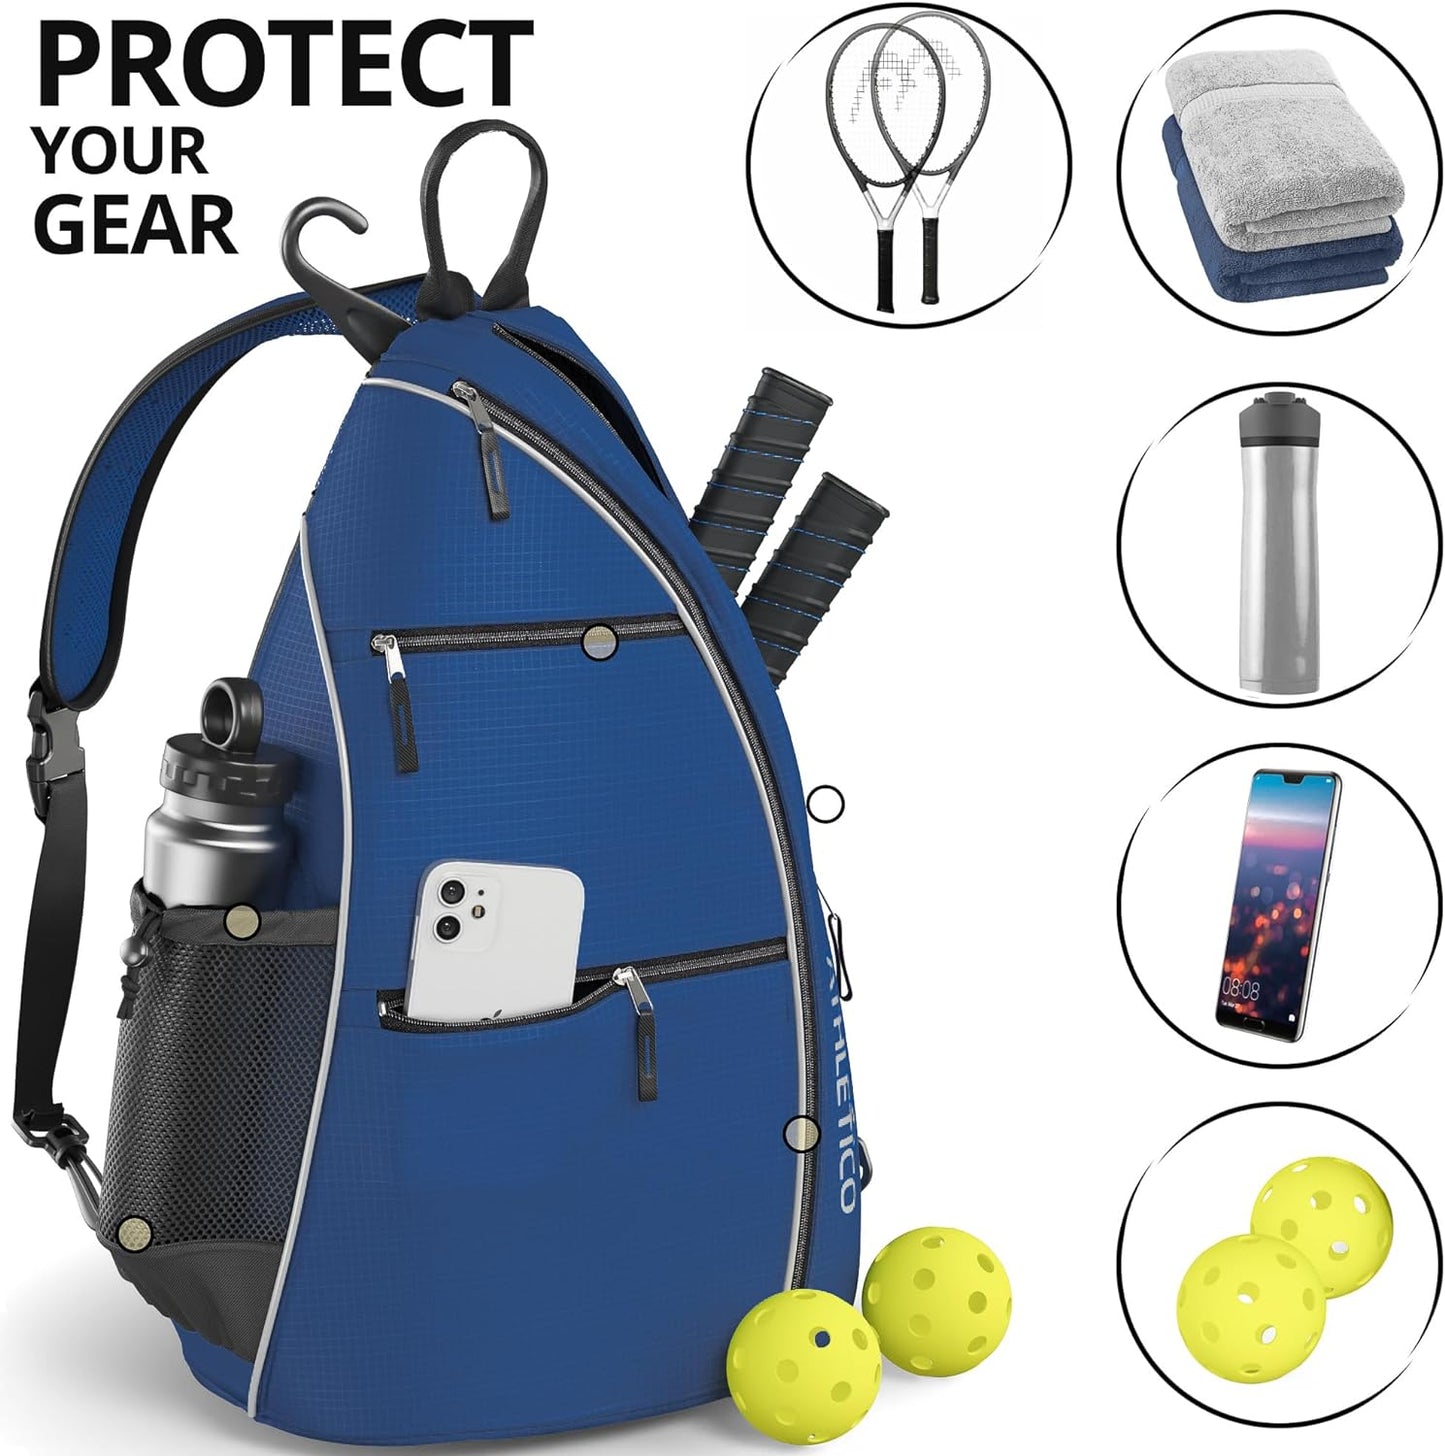 "Ultimate Sporting Companion: Revolutionize Your Game in Style - Perfect for Pickleball, Tennis, Racketball, Travel & More! - Exquisitely Designed for All Genders"